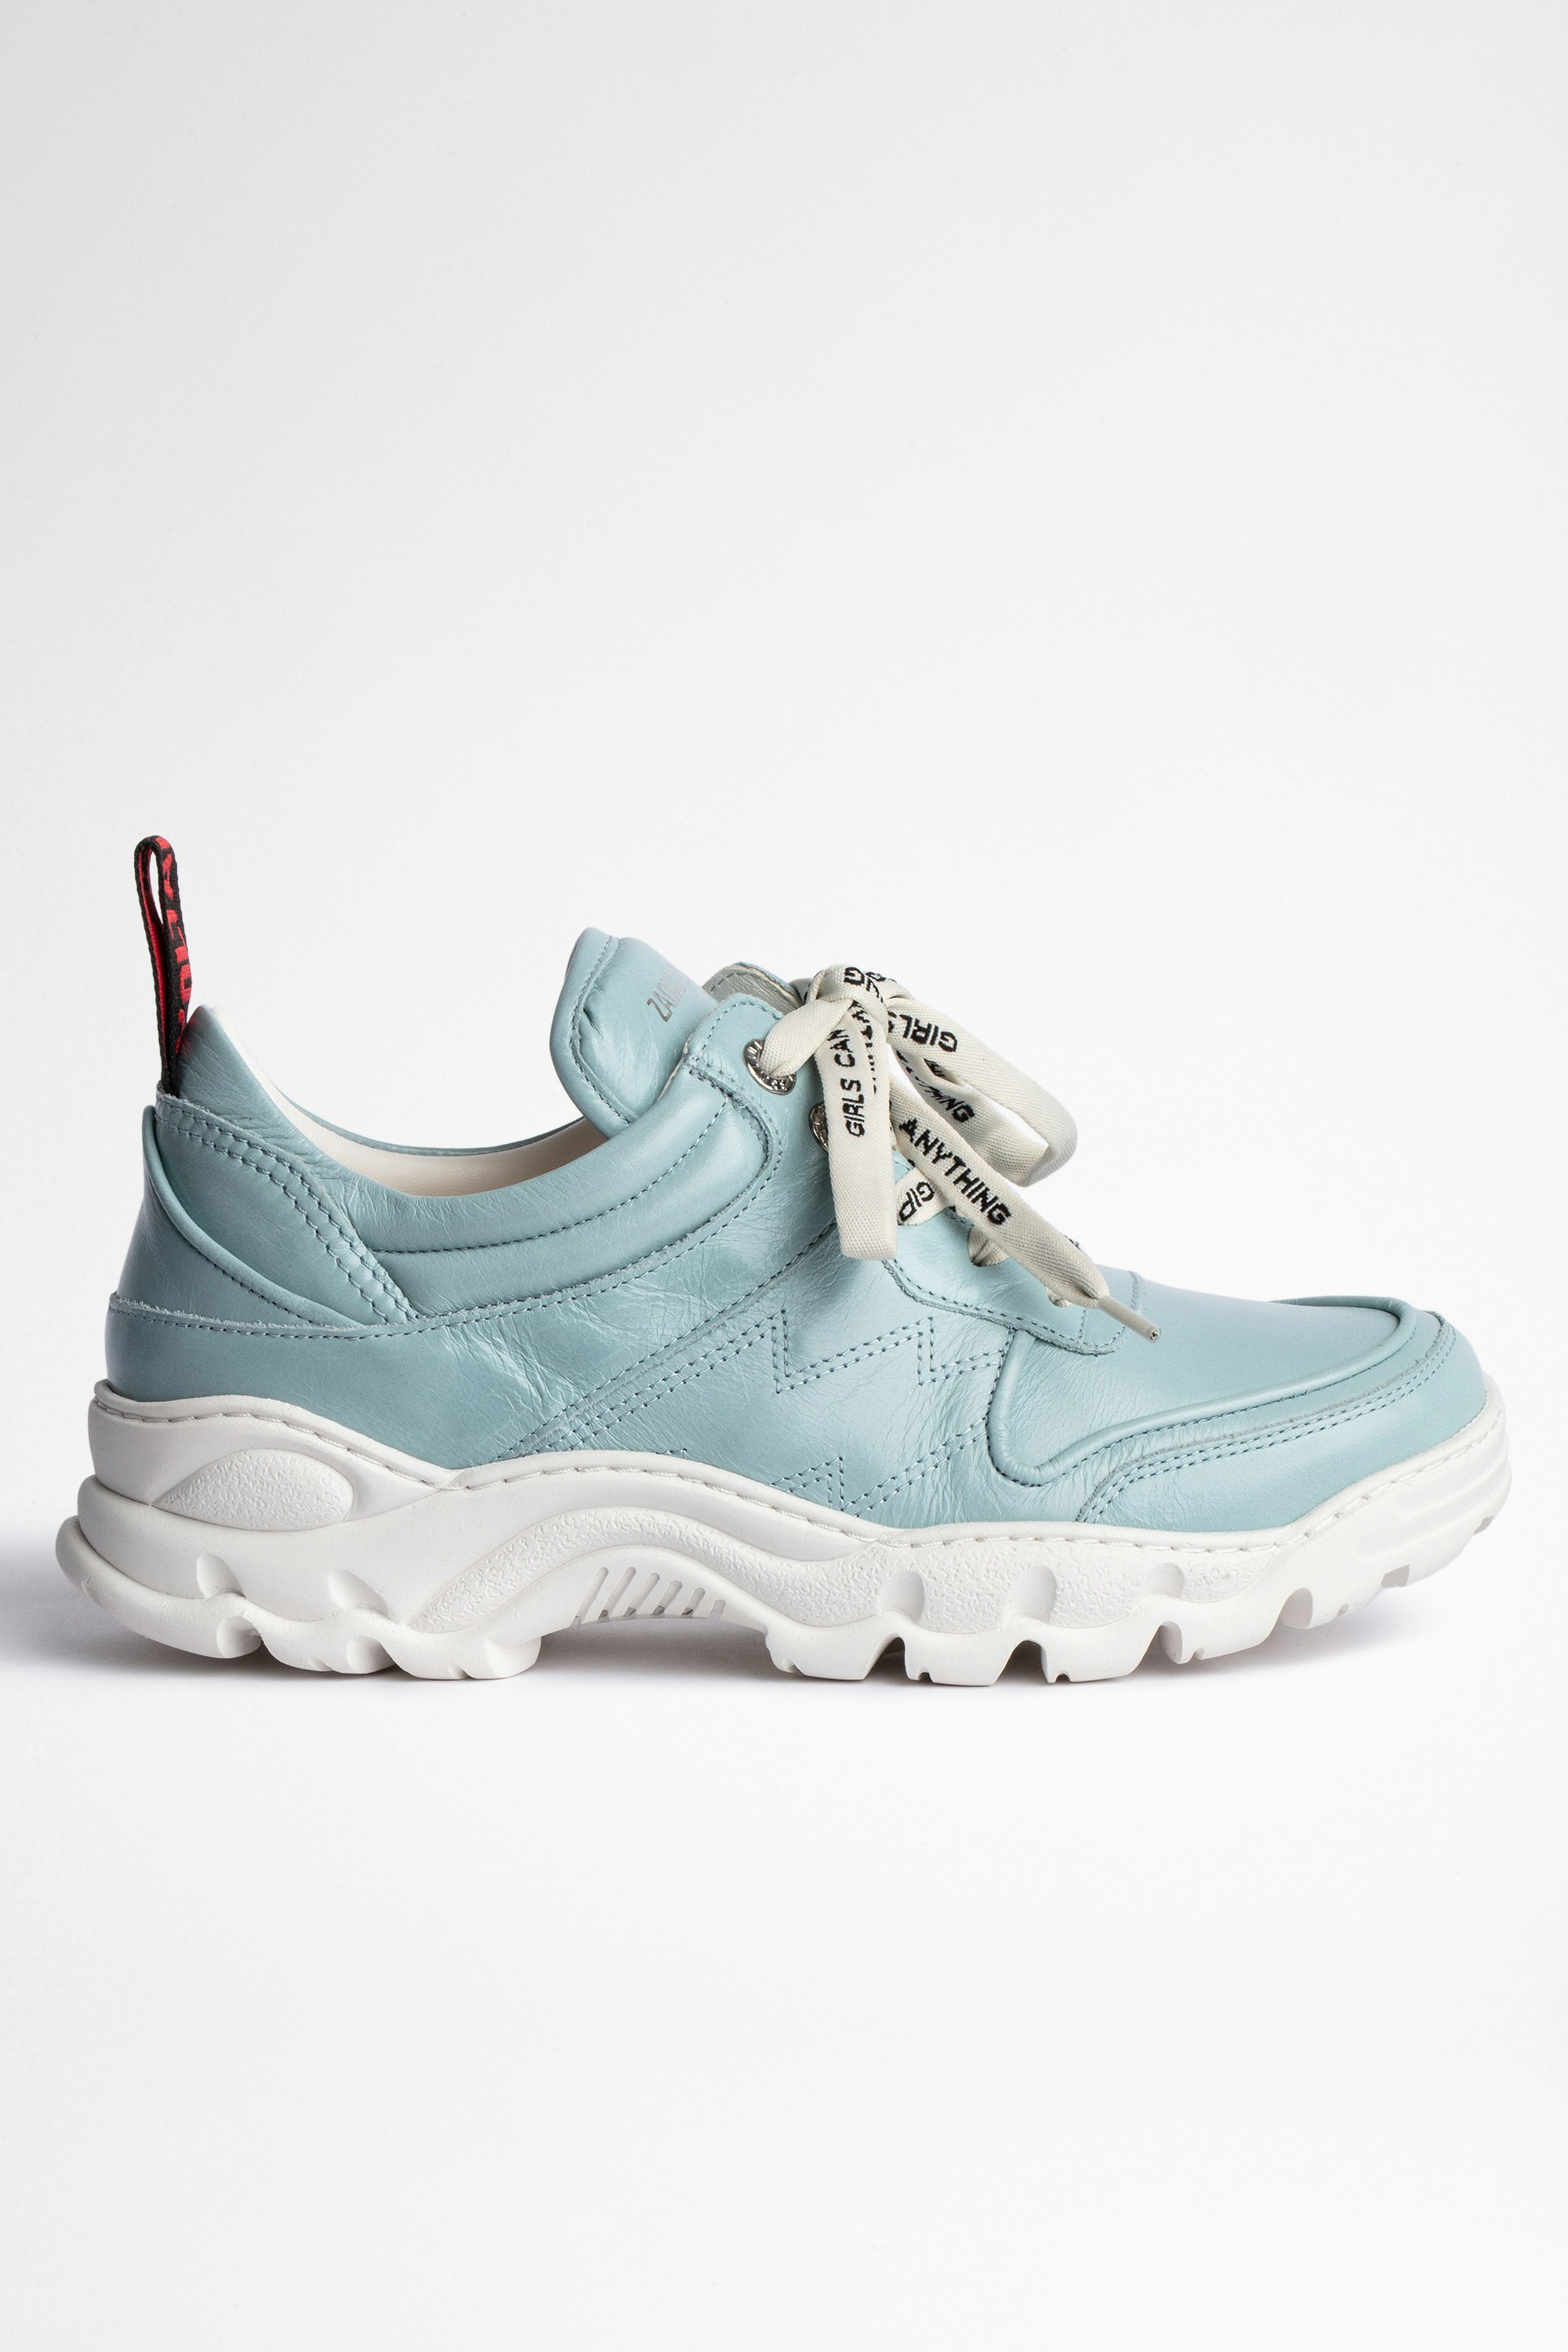 Blaze Sneakers Leather Women's sky blue leather sneakers with thick white soles